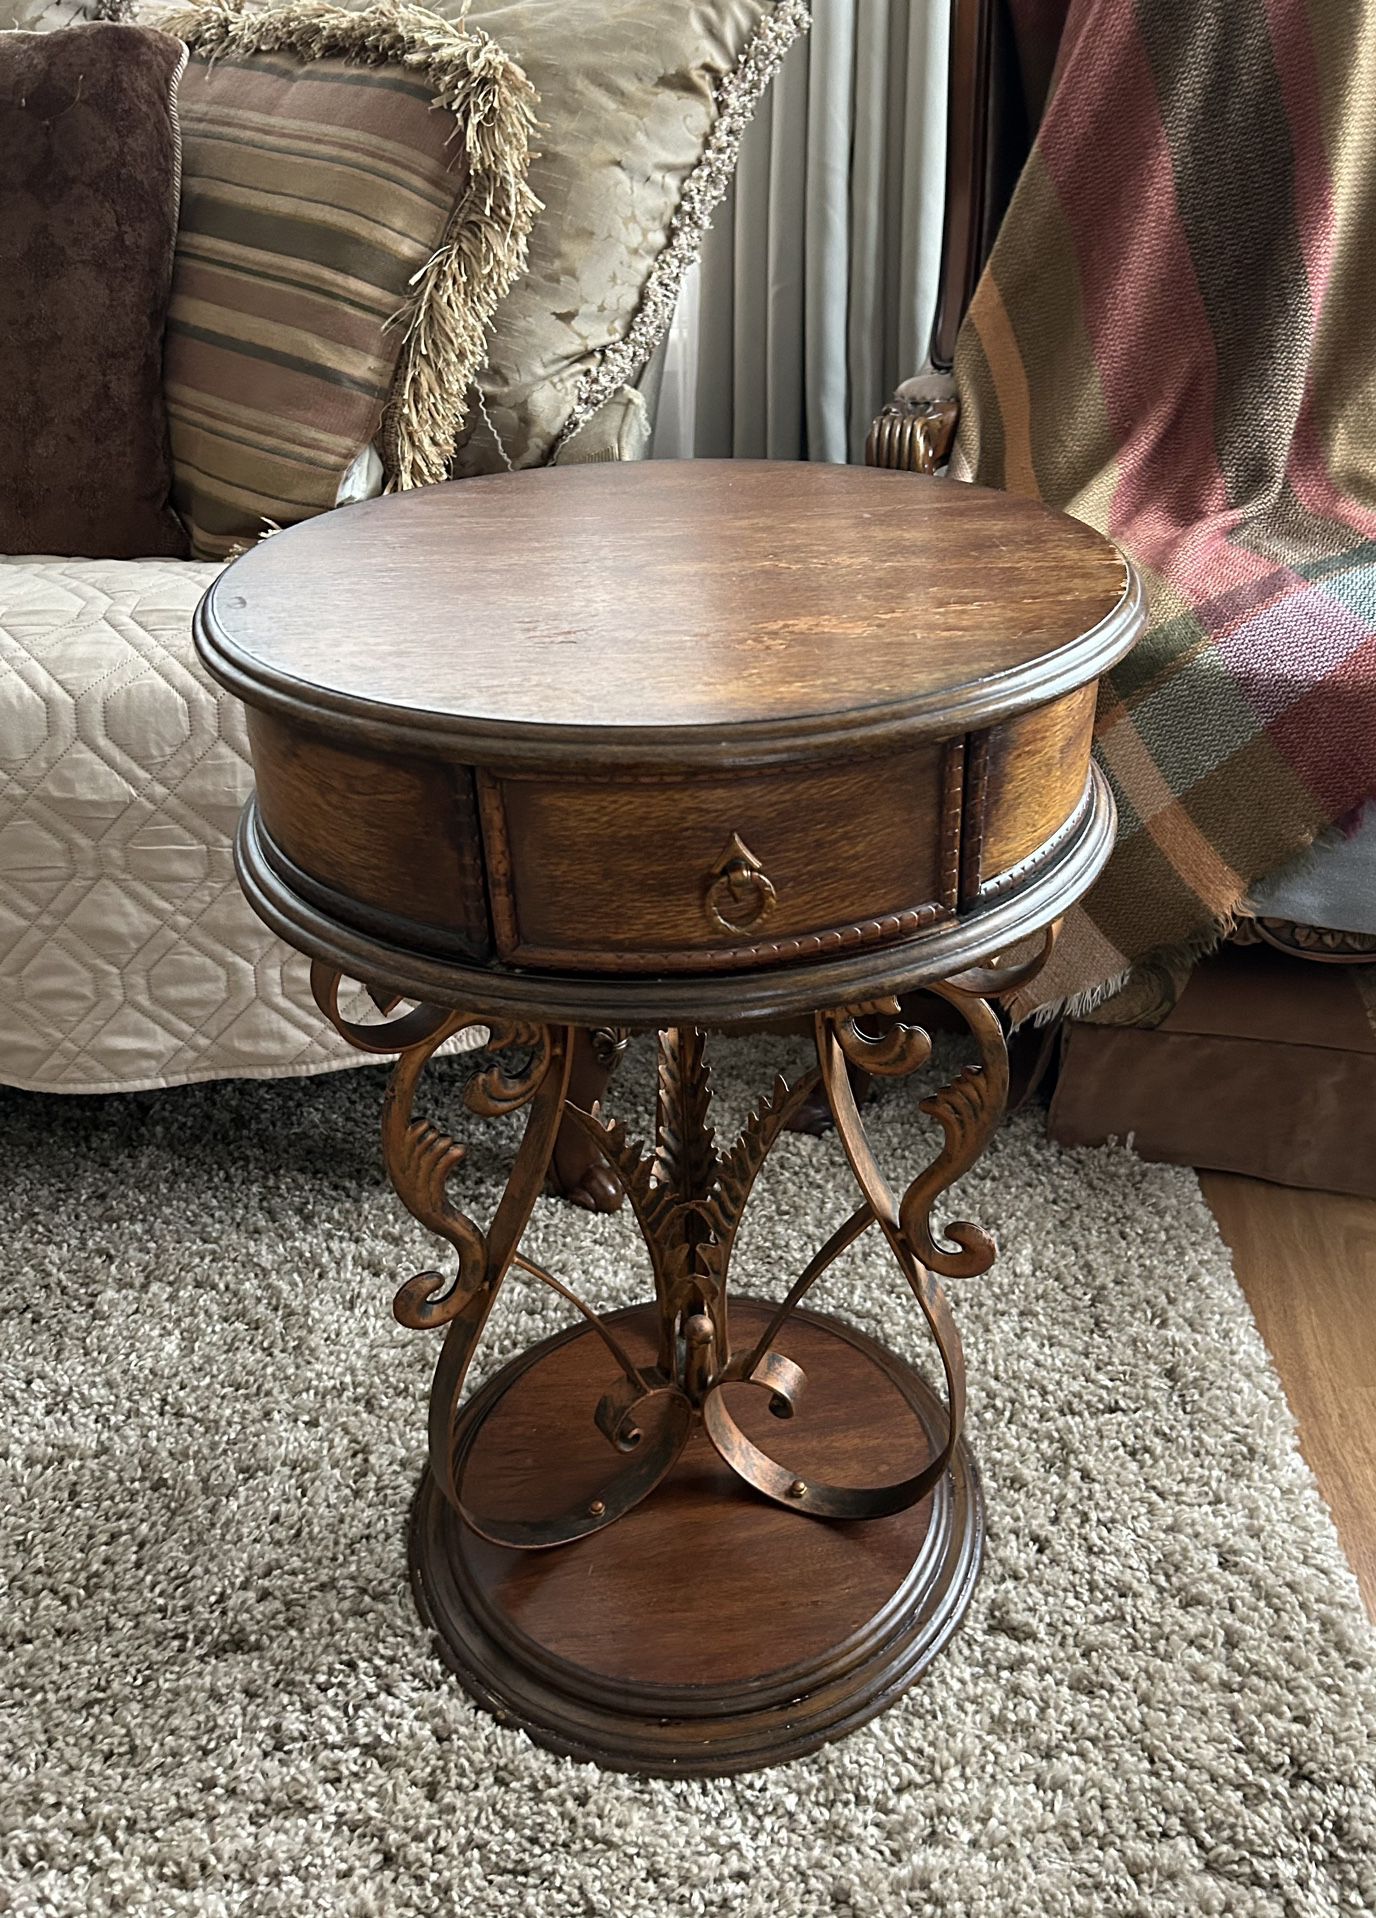 Side Table Or Accent Table - Elegant And Unique Design